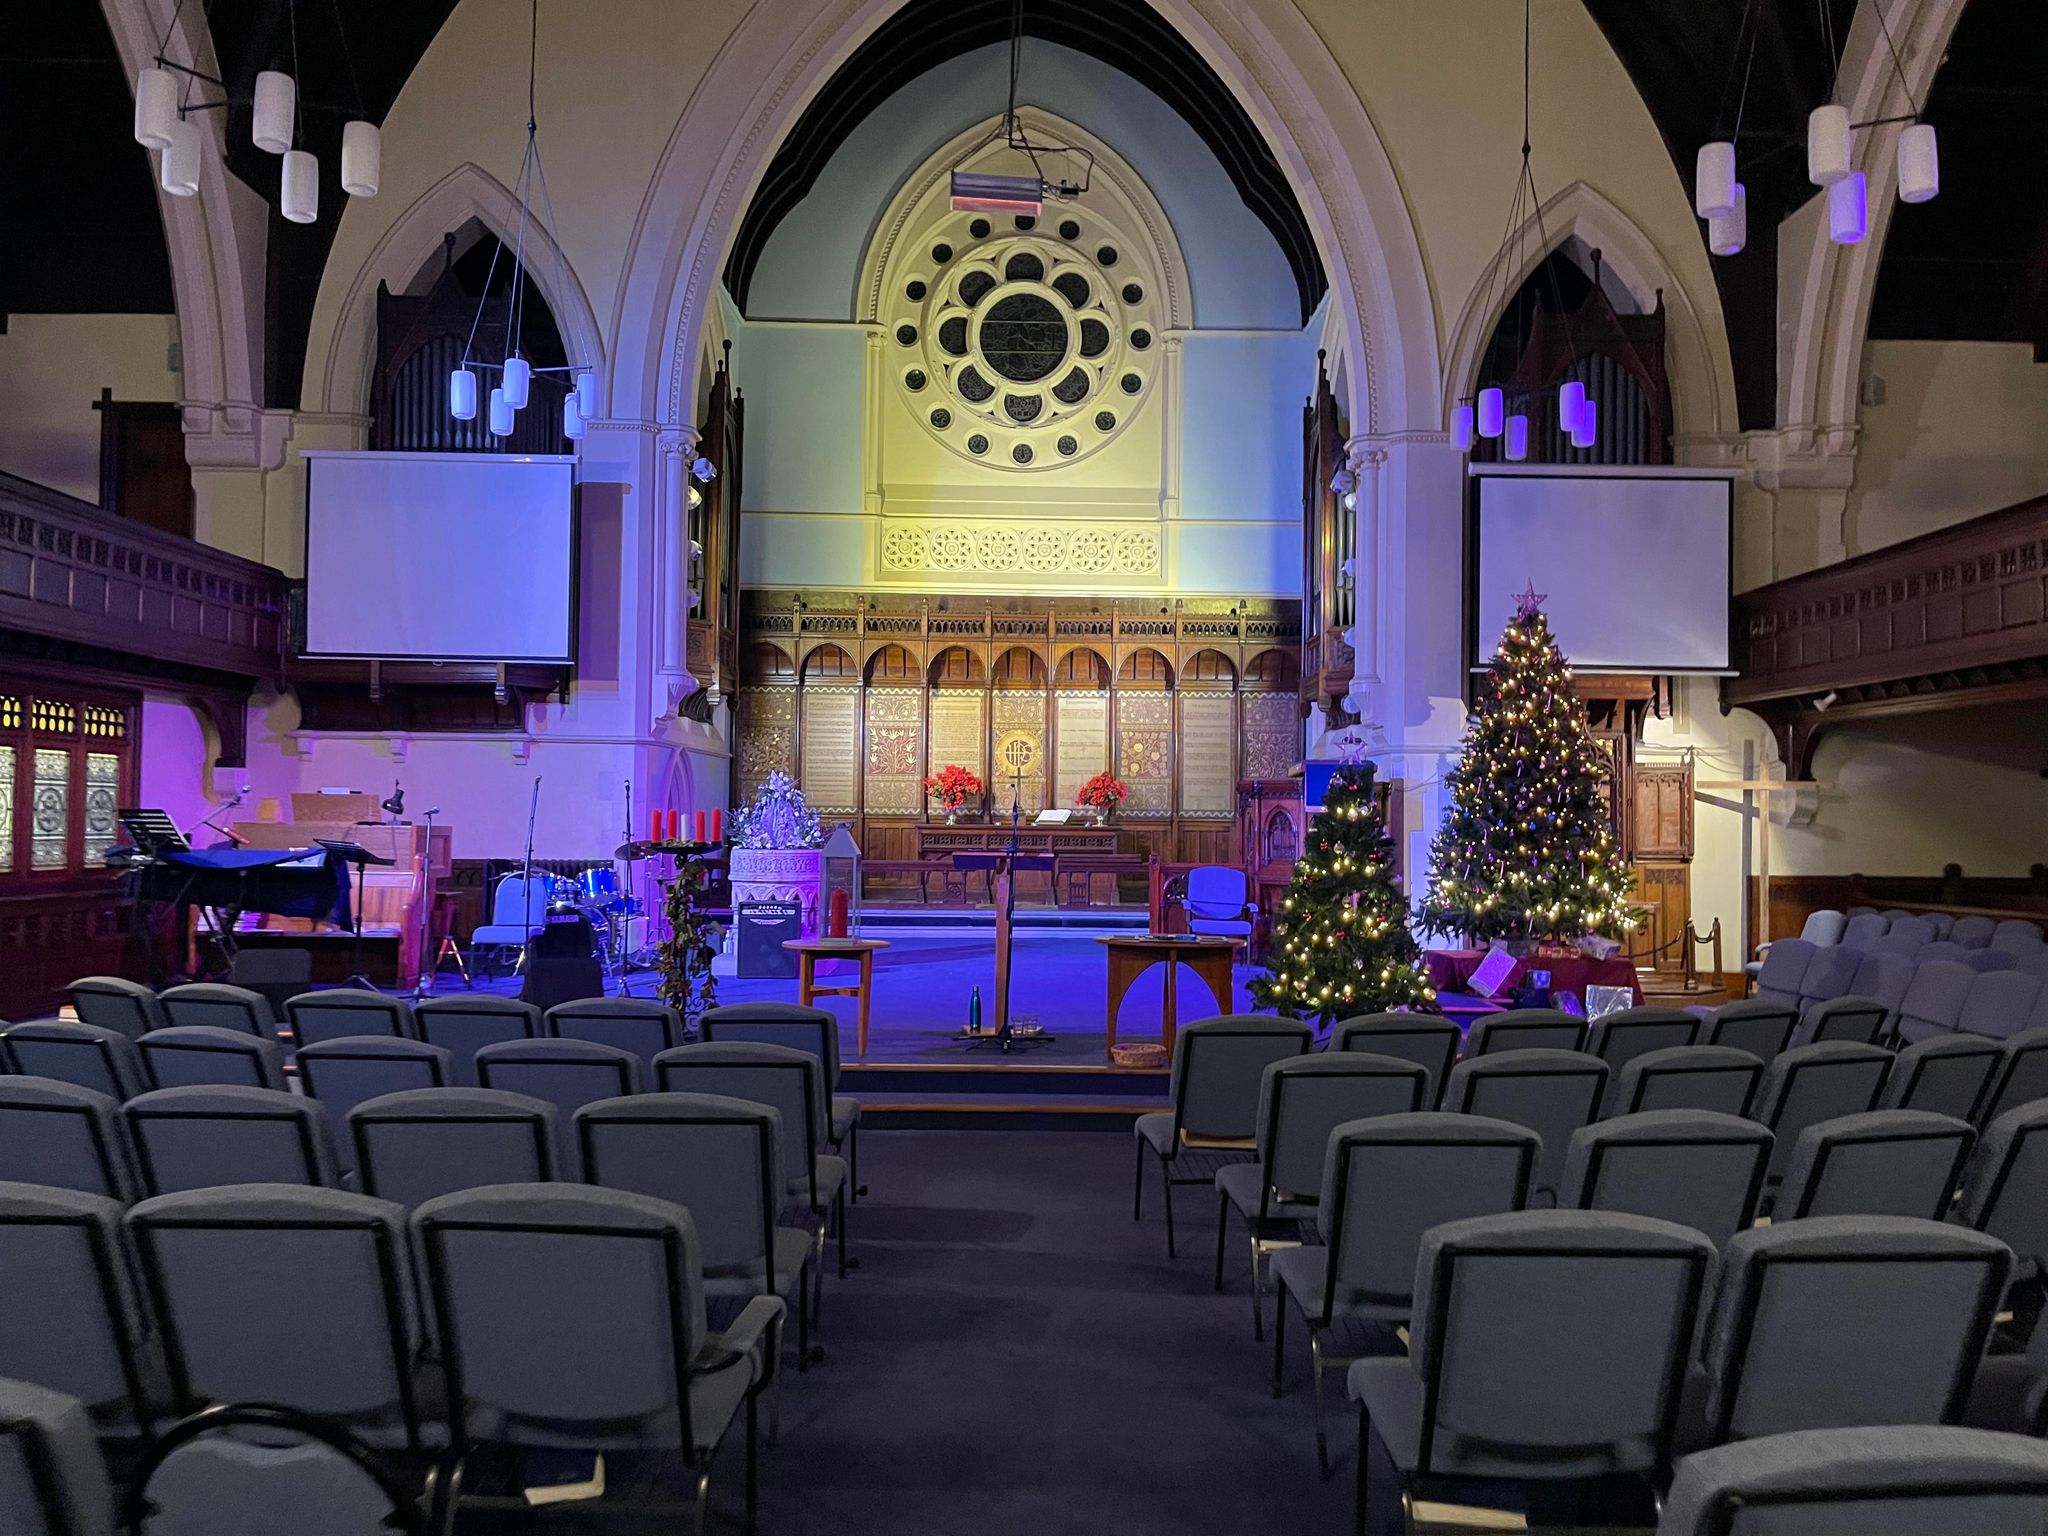 Massam and Marshall Independent Funeral Directors are once again hosting an evening of reflection, song and prayer to remember loved ones in the festive season